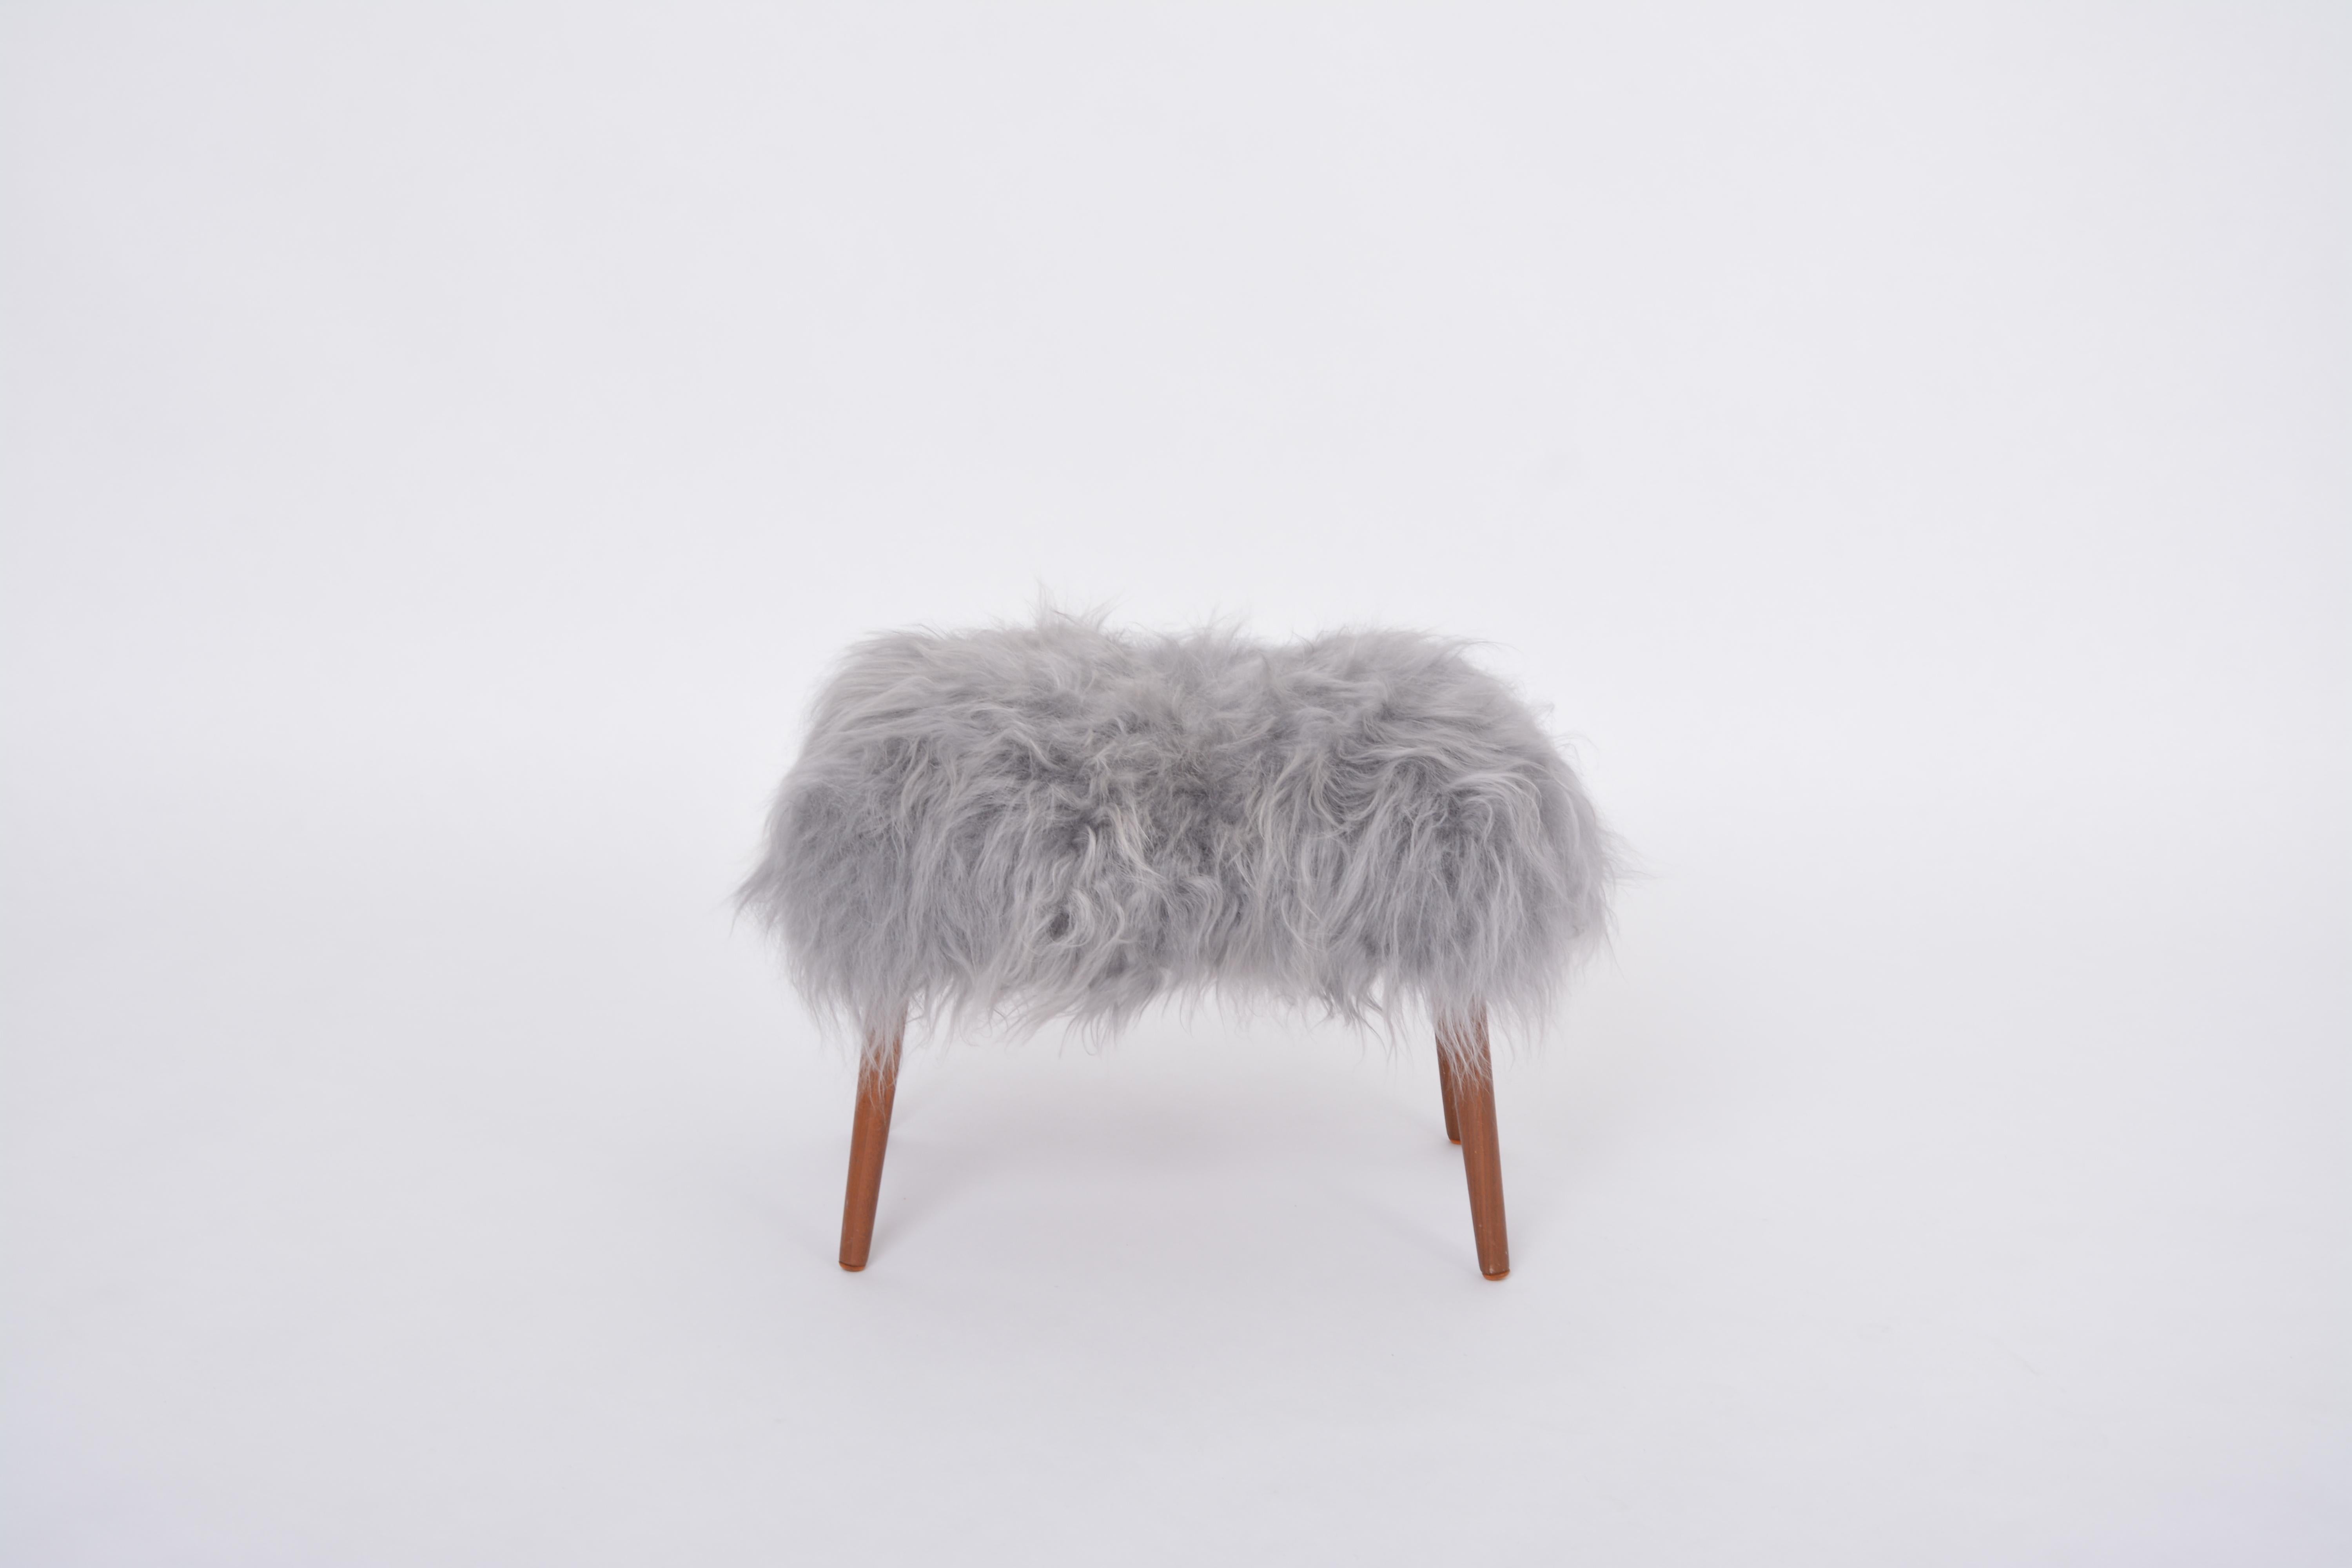 Danish Mid-century Modern stool reupholstered in grey sheep skin
This ottoman/pouf/ stool was designed and manufactured in the 1950s in Denmark. It is made of  wood and has been reupholstered with a long haired grey sheep skin.  By choosing this